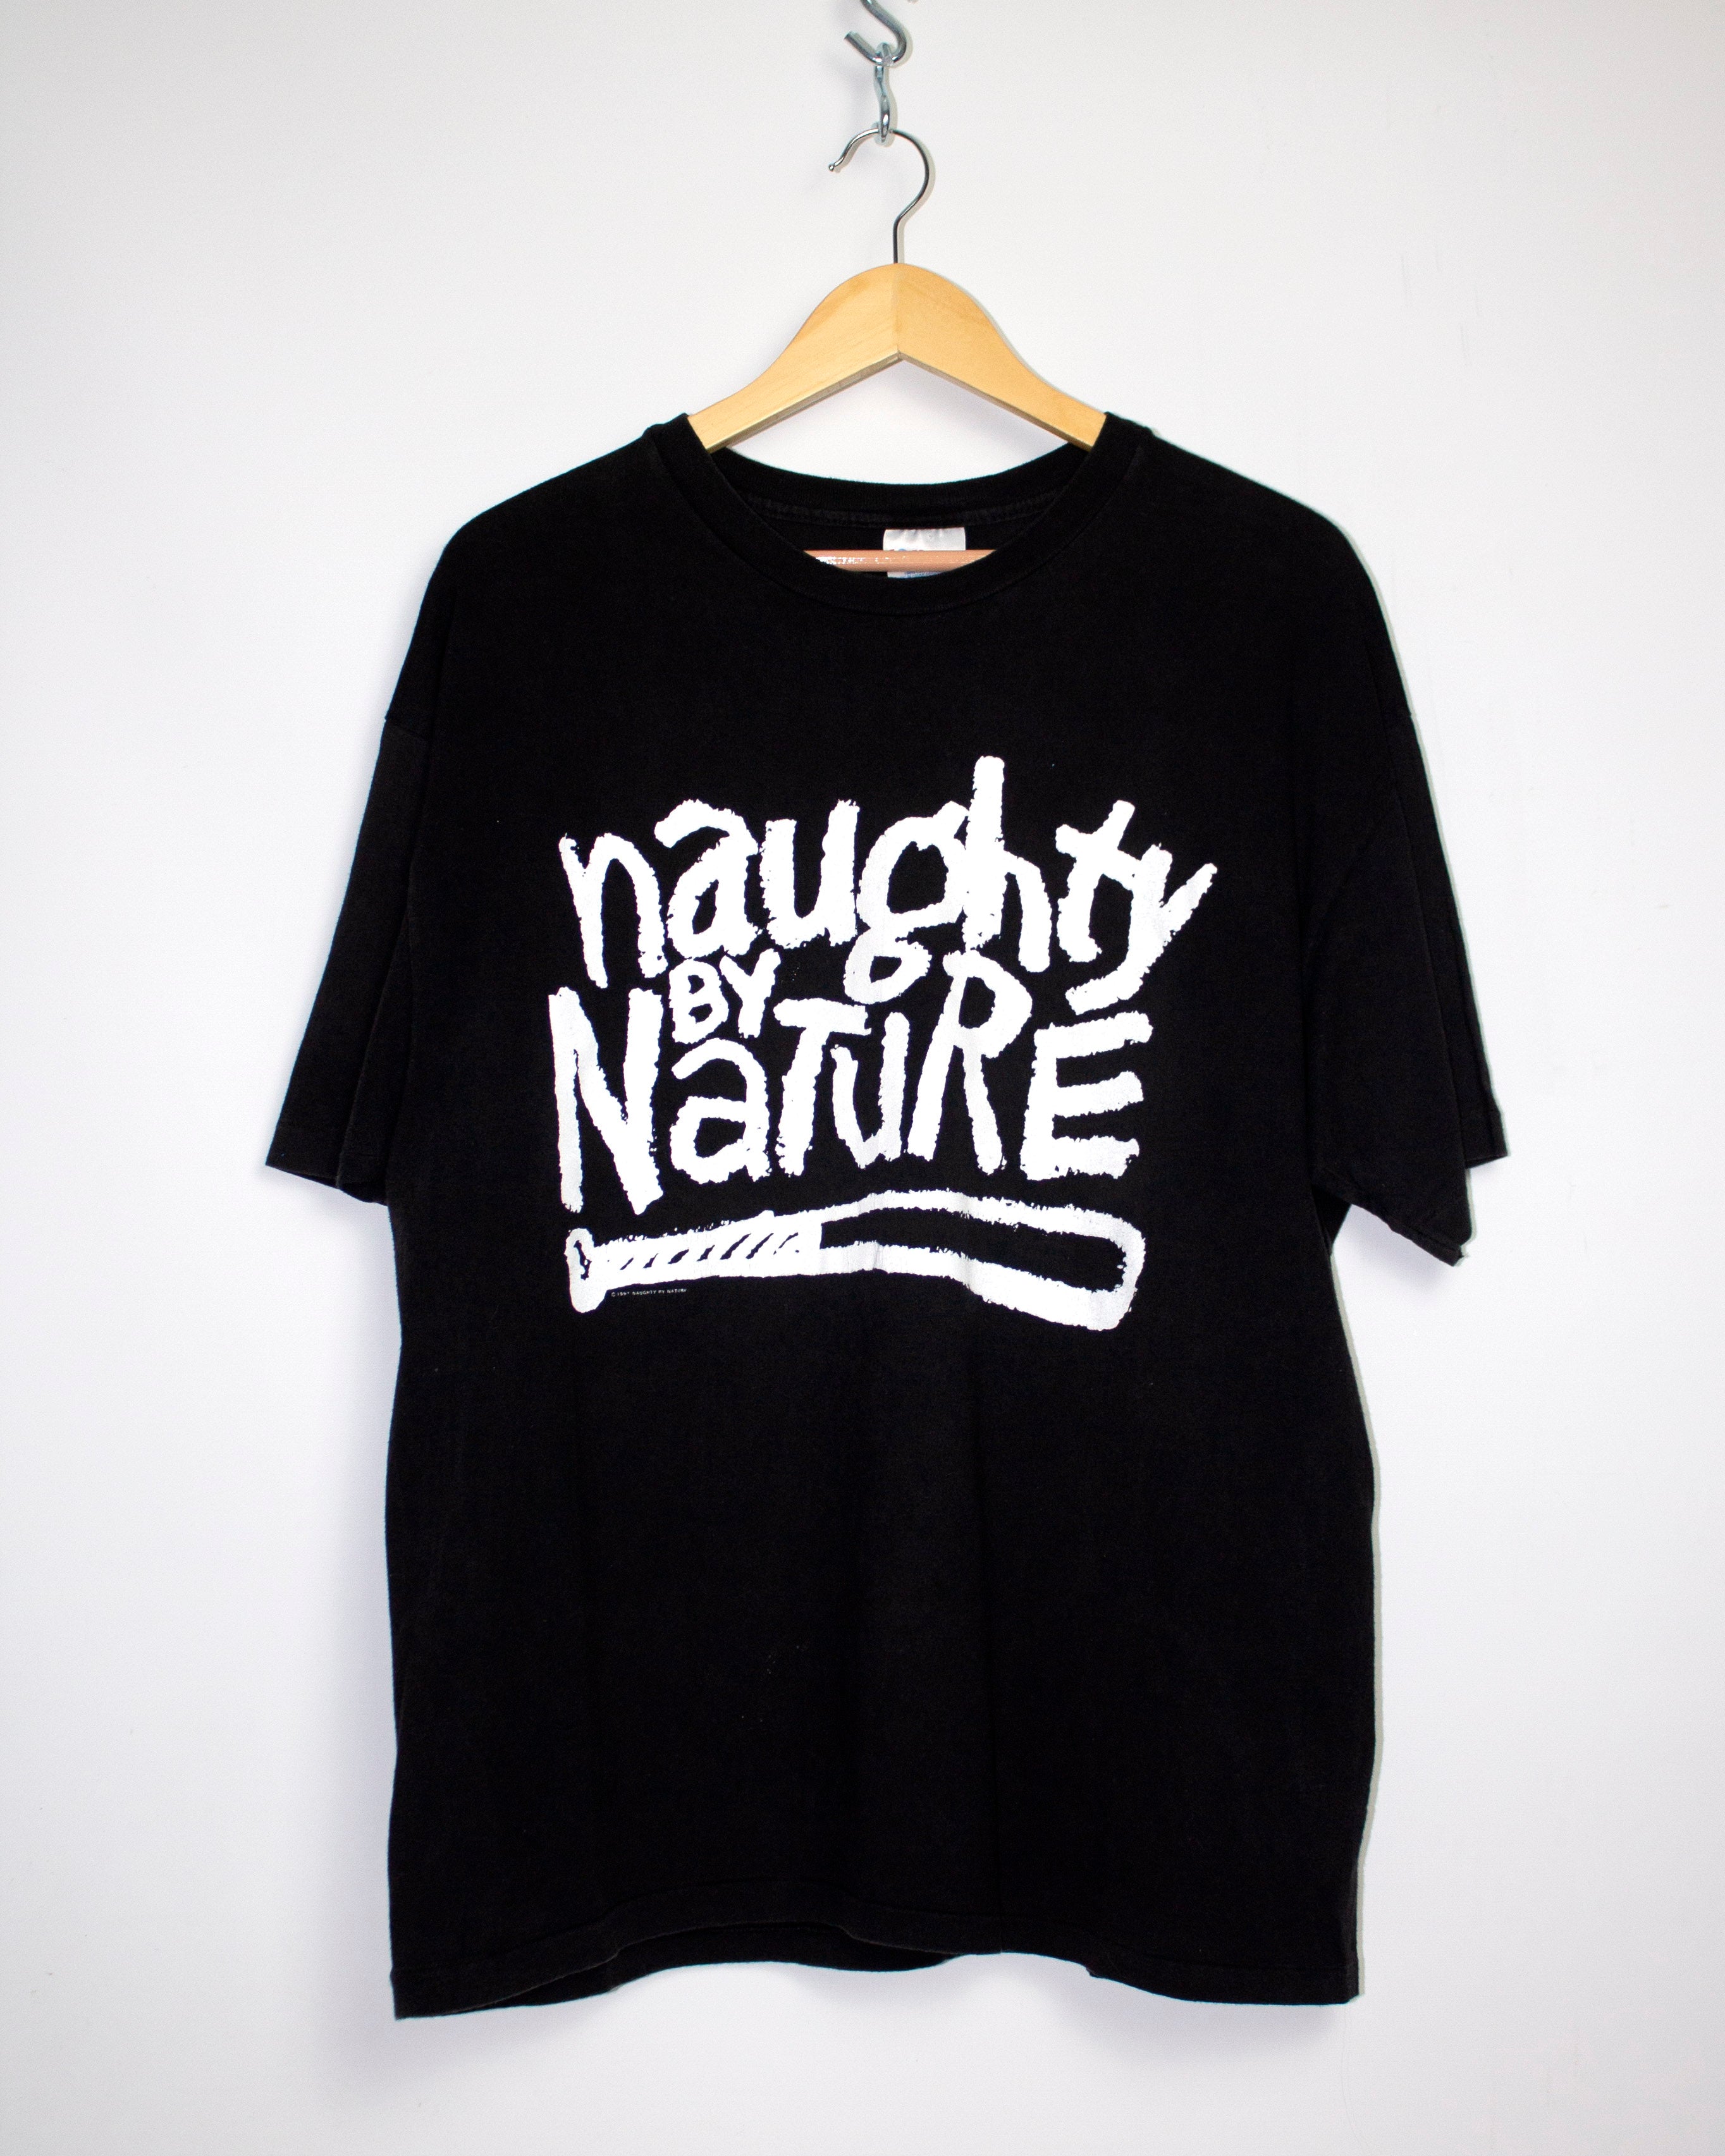 Vintage Naughty By Nature Down With OPP T-Shirt Sz XL